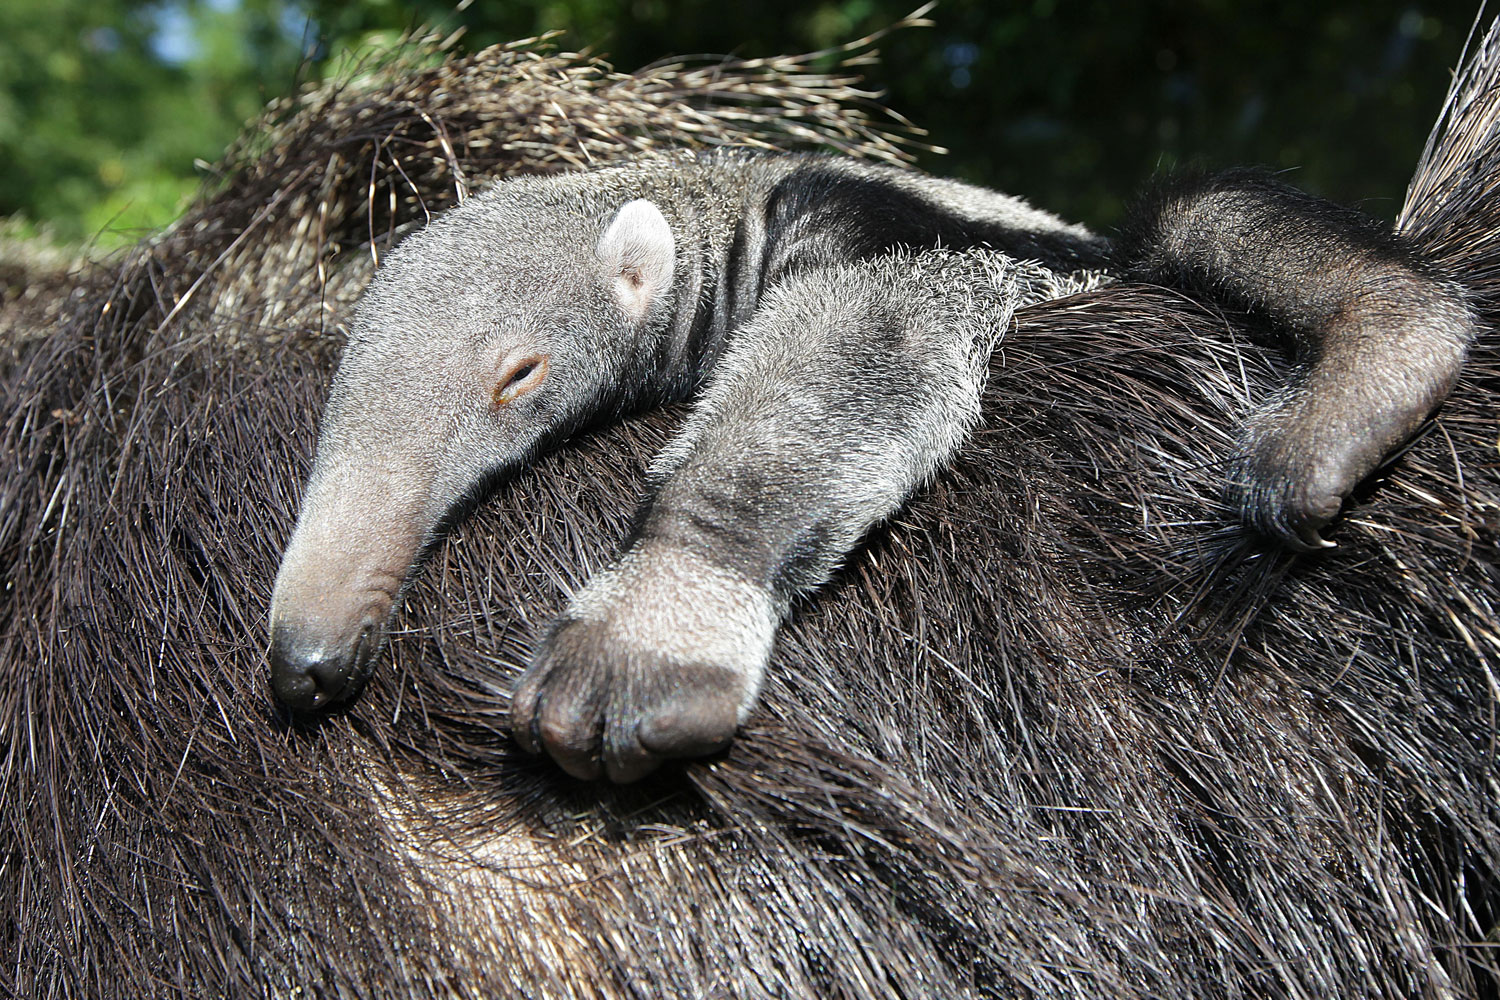 A Newborn Anteater baby relaxes on its mother Stella's back at Bergzoo Halle, Germany.